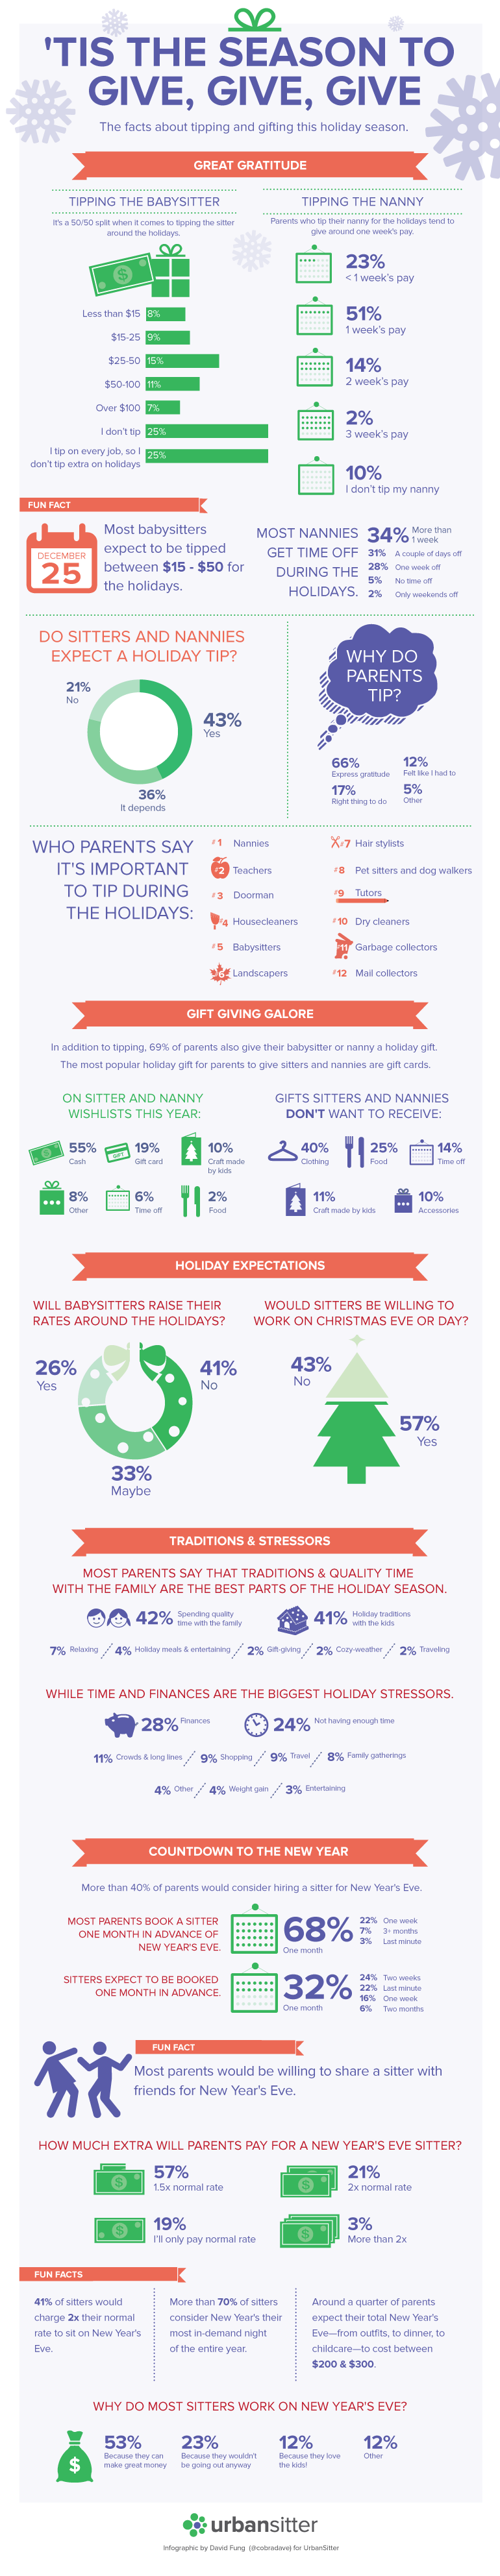 2015-Holiday-Tipping-Infographic-Logo